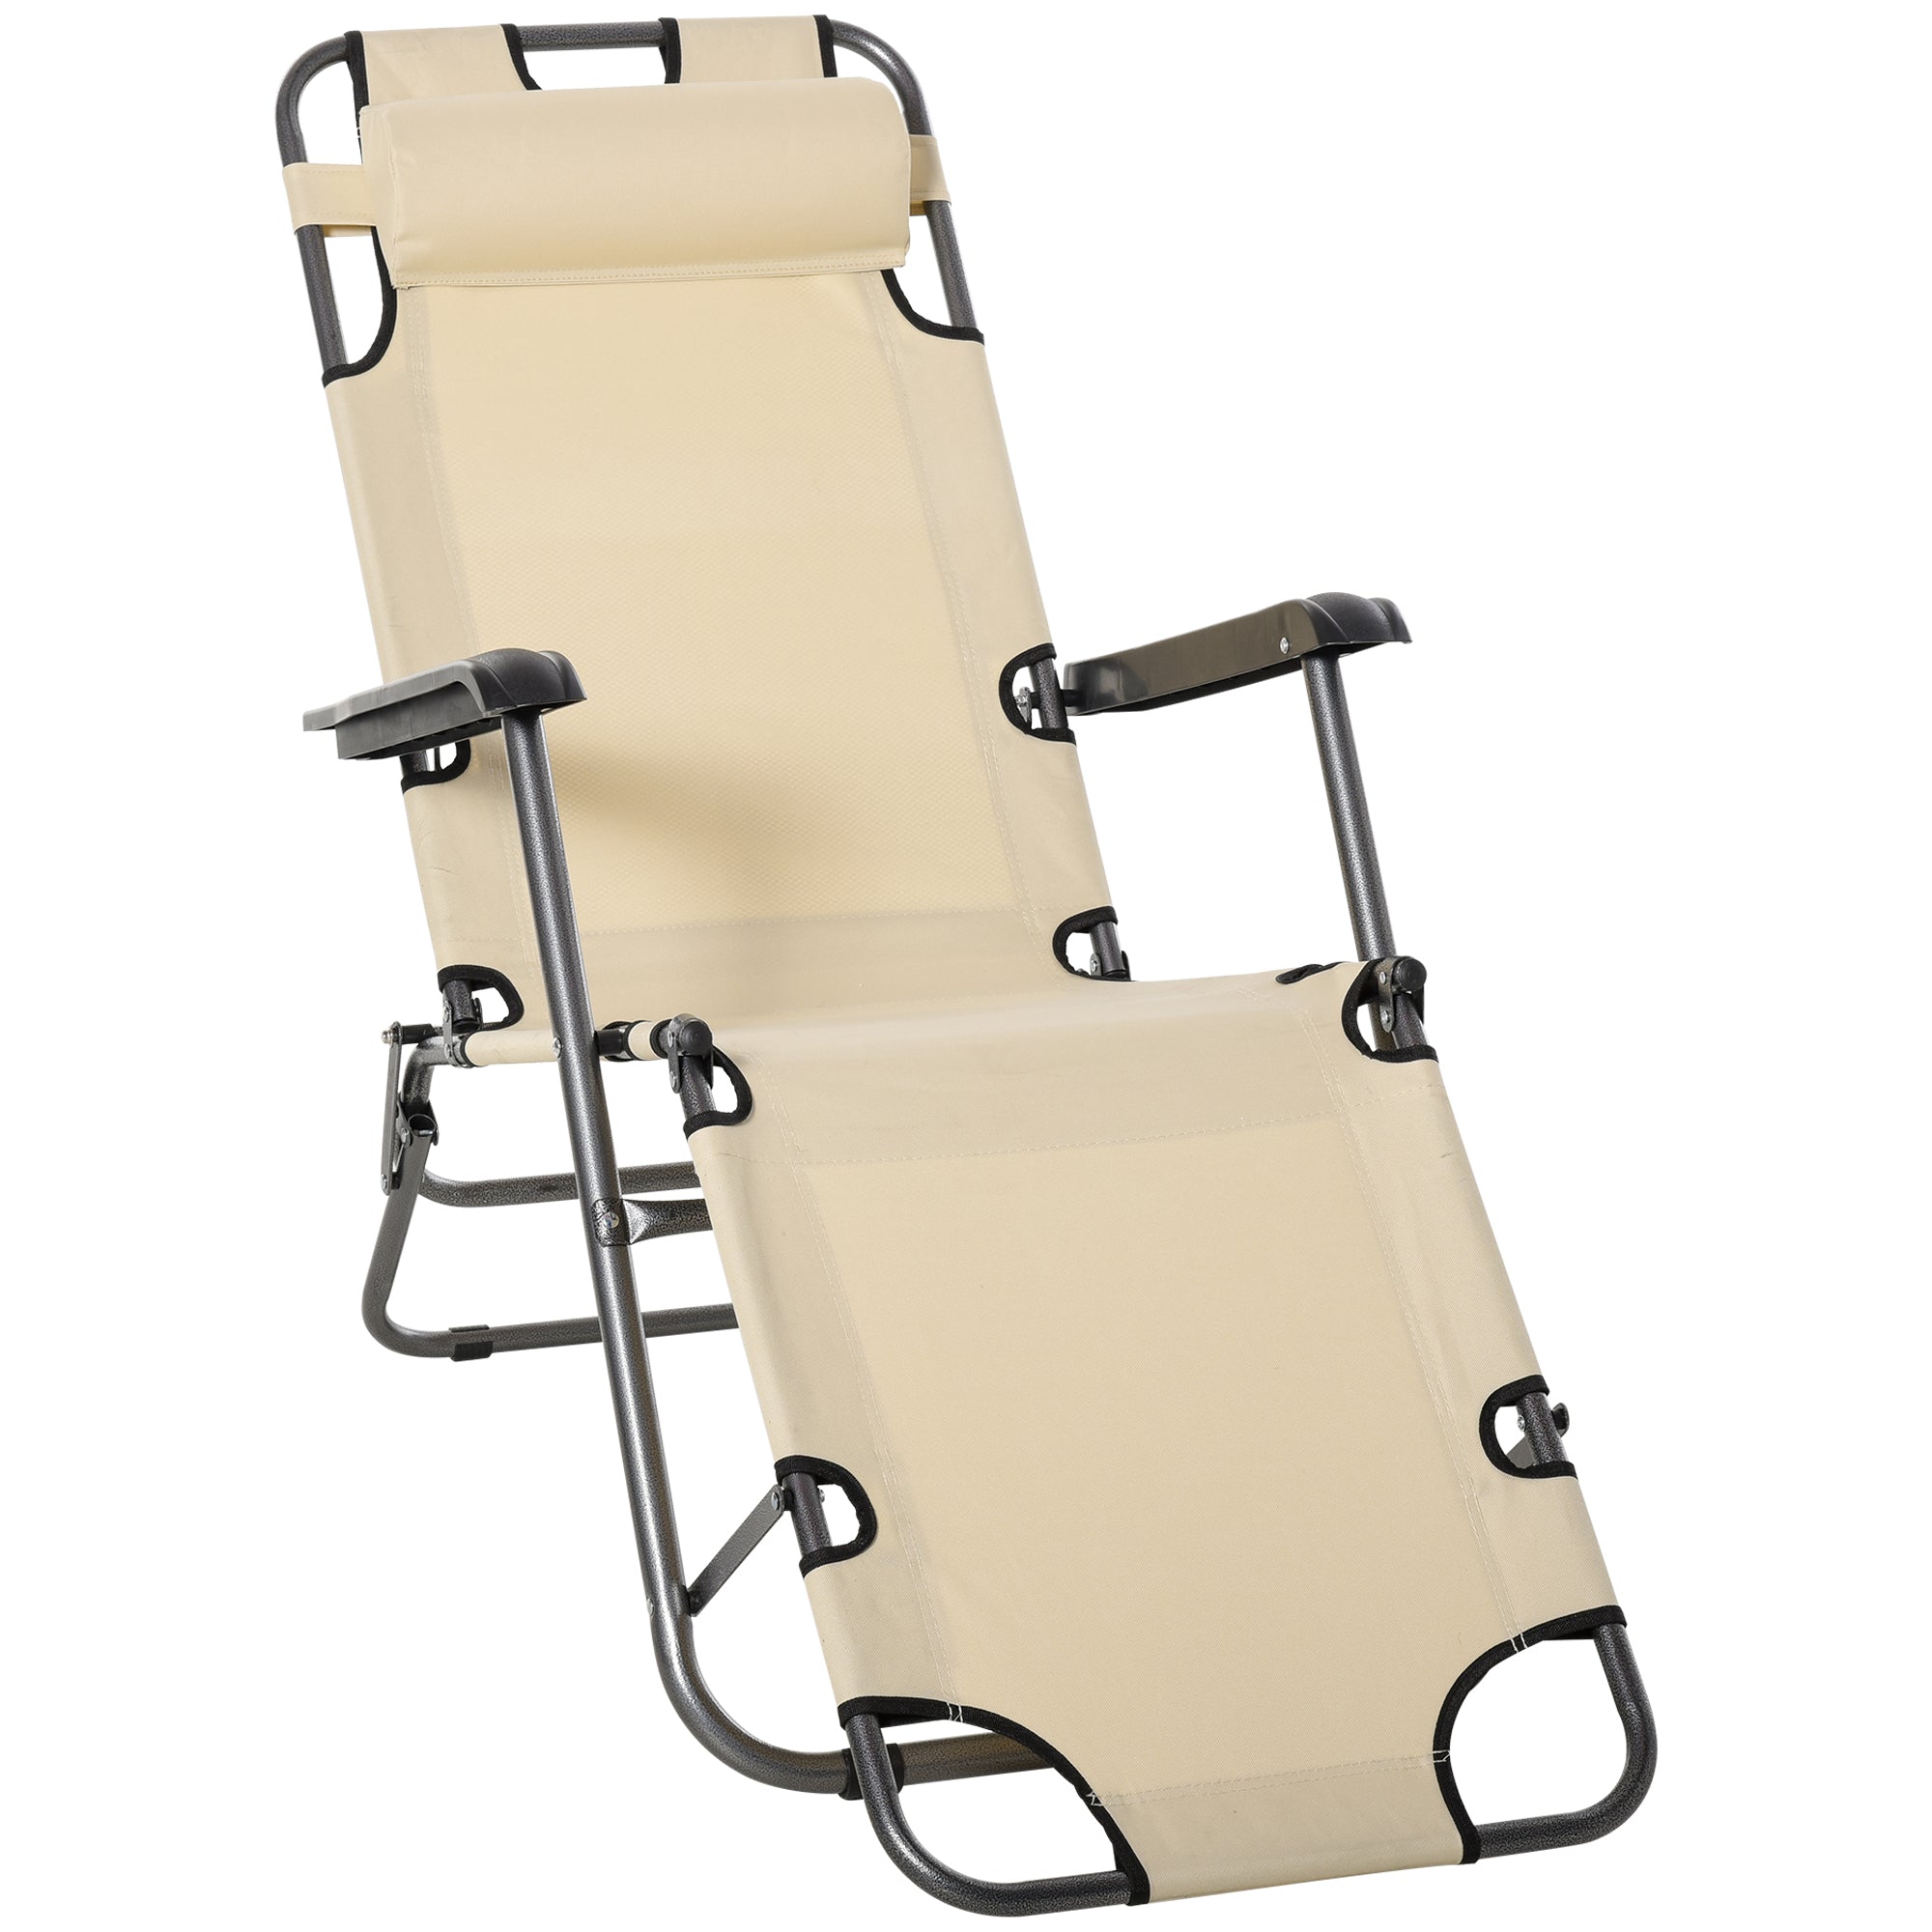 Outsunny 2 in 1 Outdoor Folding Sun Lounger w/ Adjustable Back and Pillow Beige  | TJ Hughes